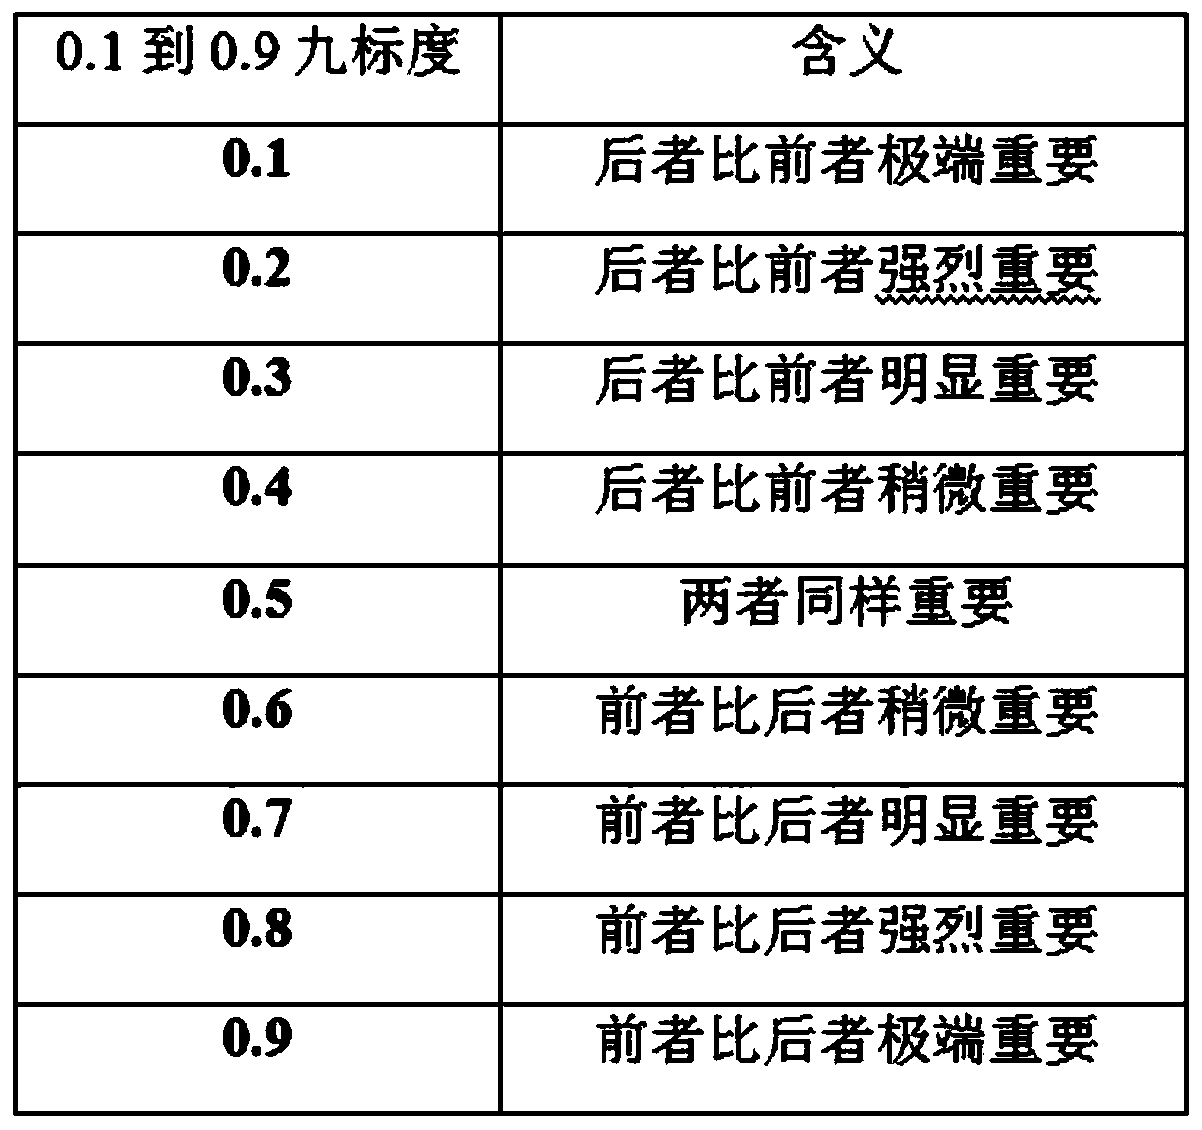 Electric power communication network operation and maintenance work order scheduling method based on Hopfield neural network